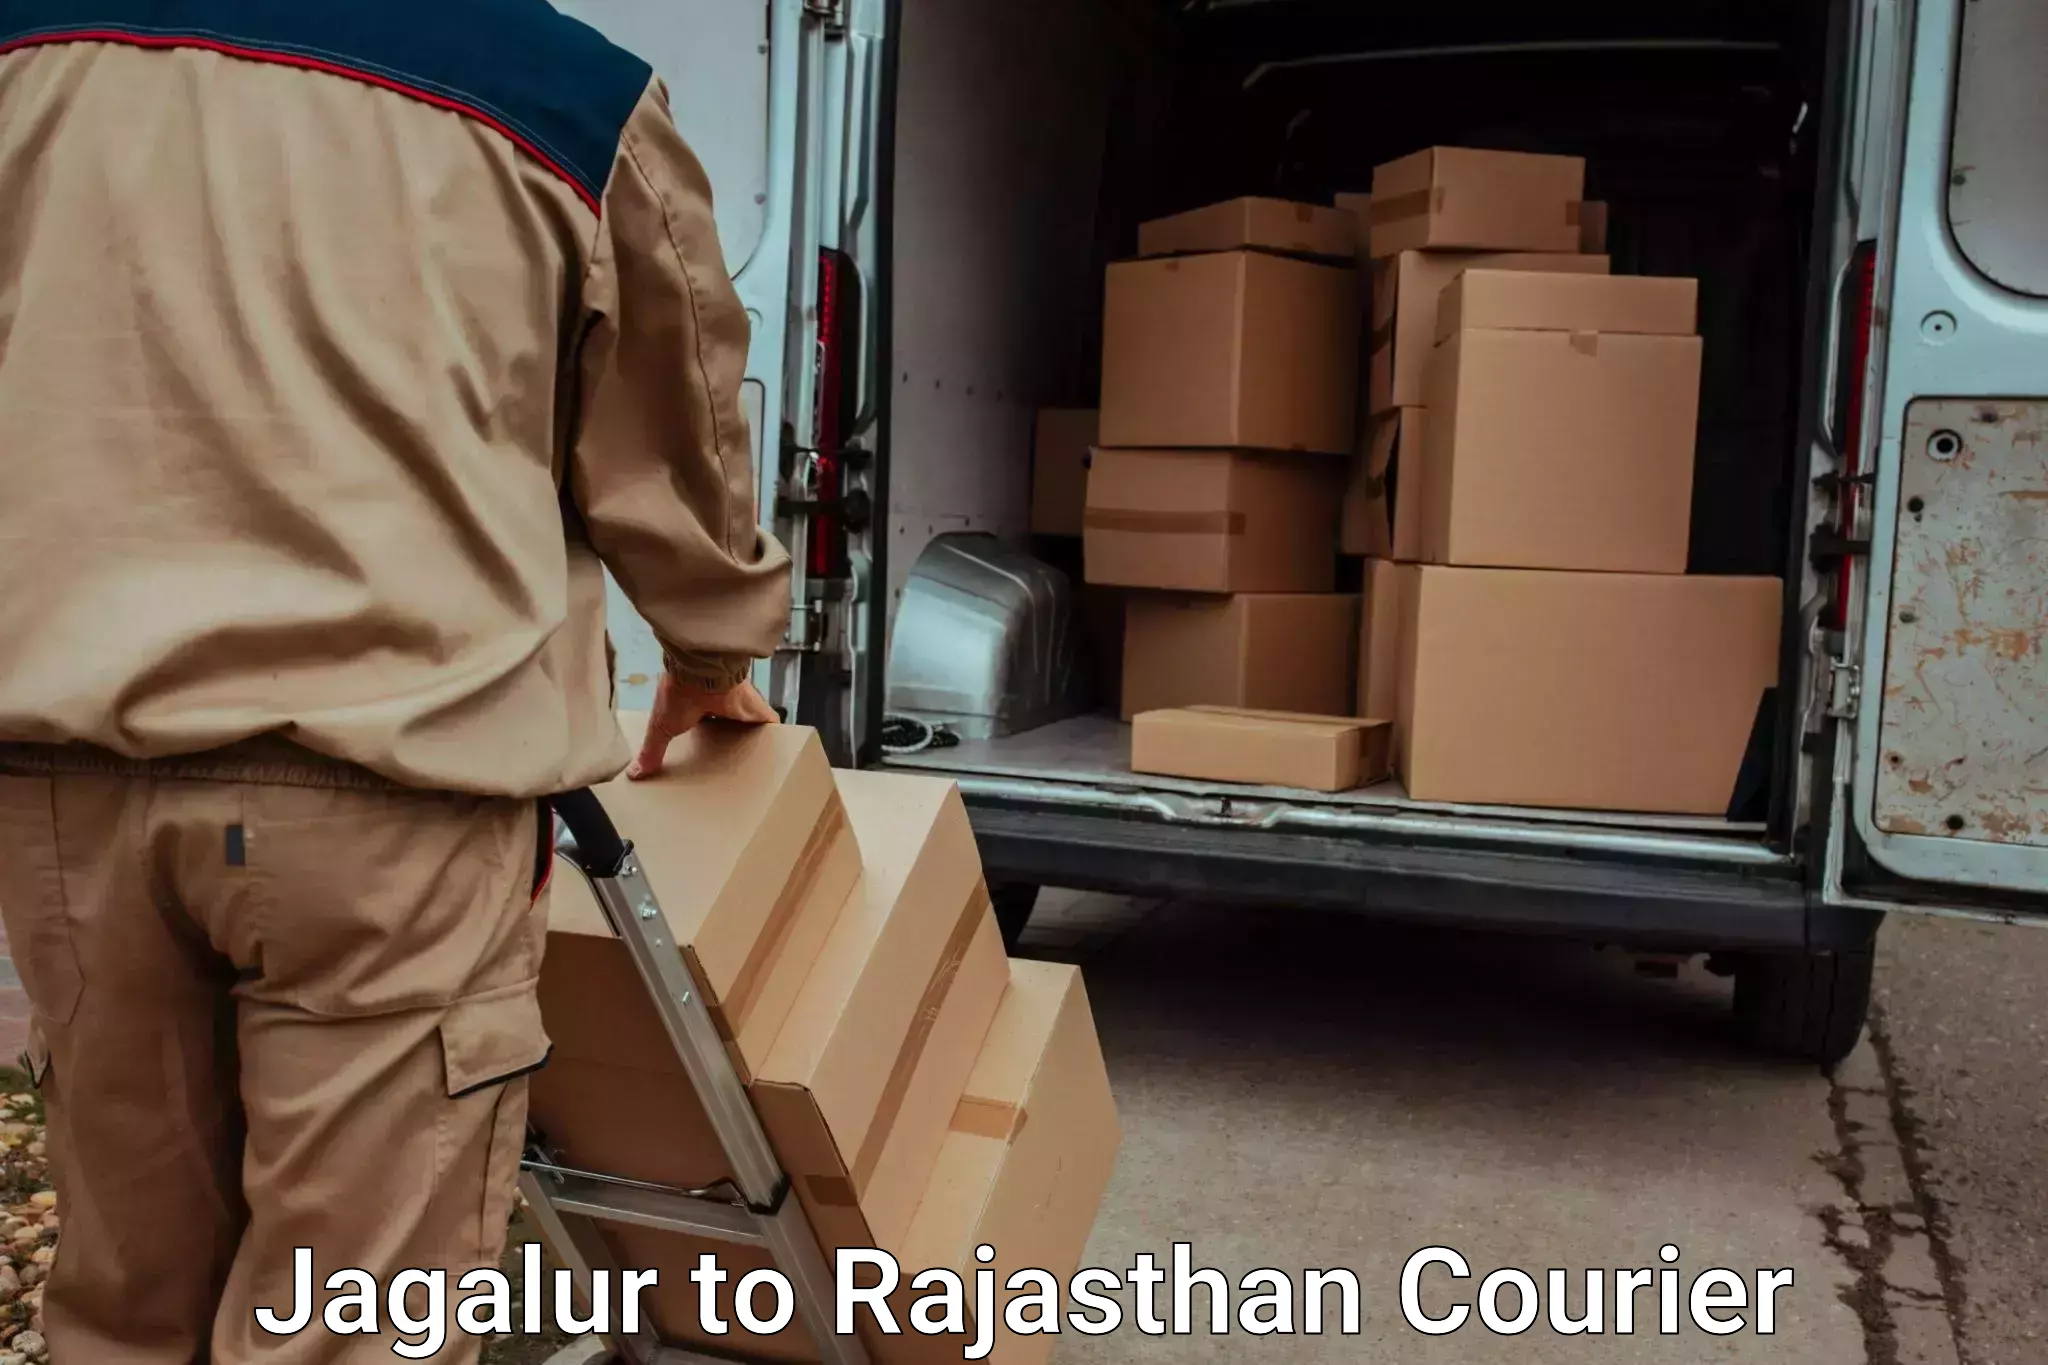 Baggage transport technology Jagalur to Dholpur